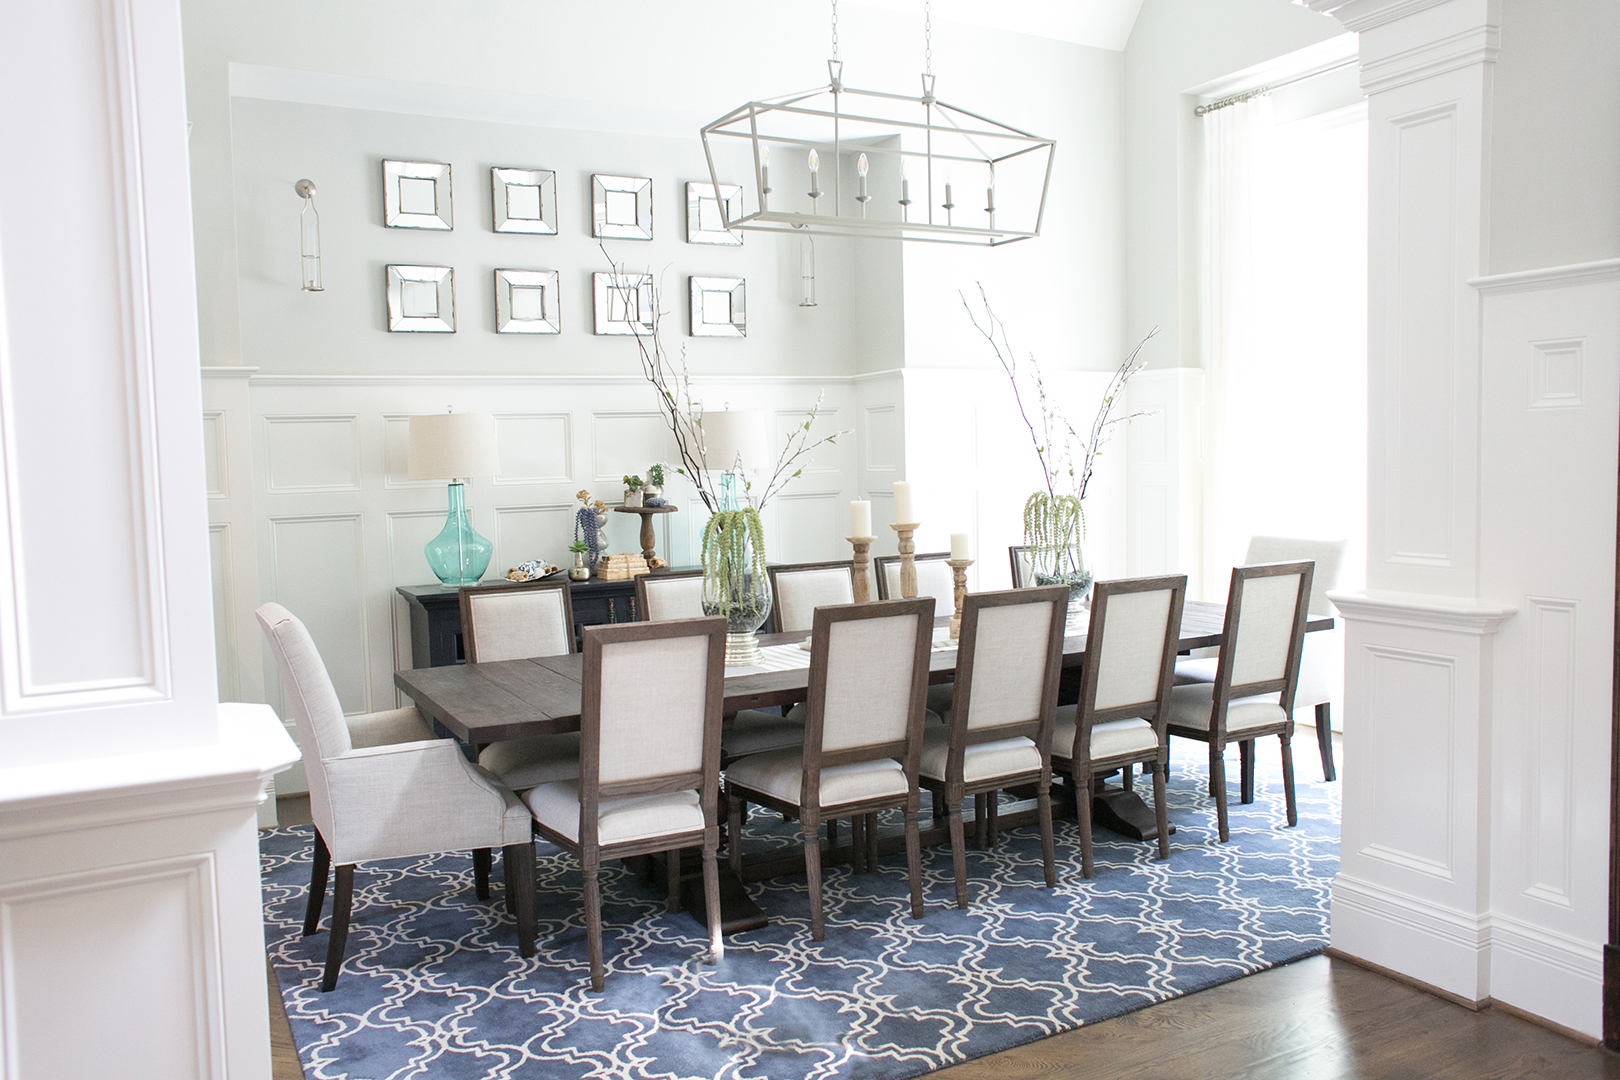 interior design of a dining room in raleigh nc